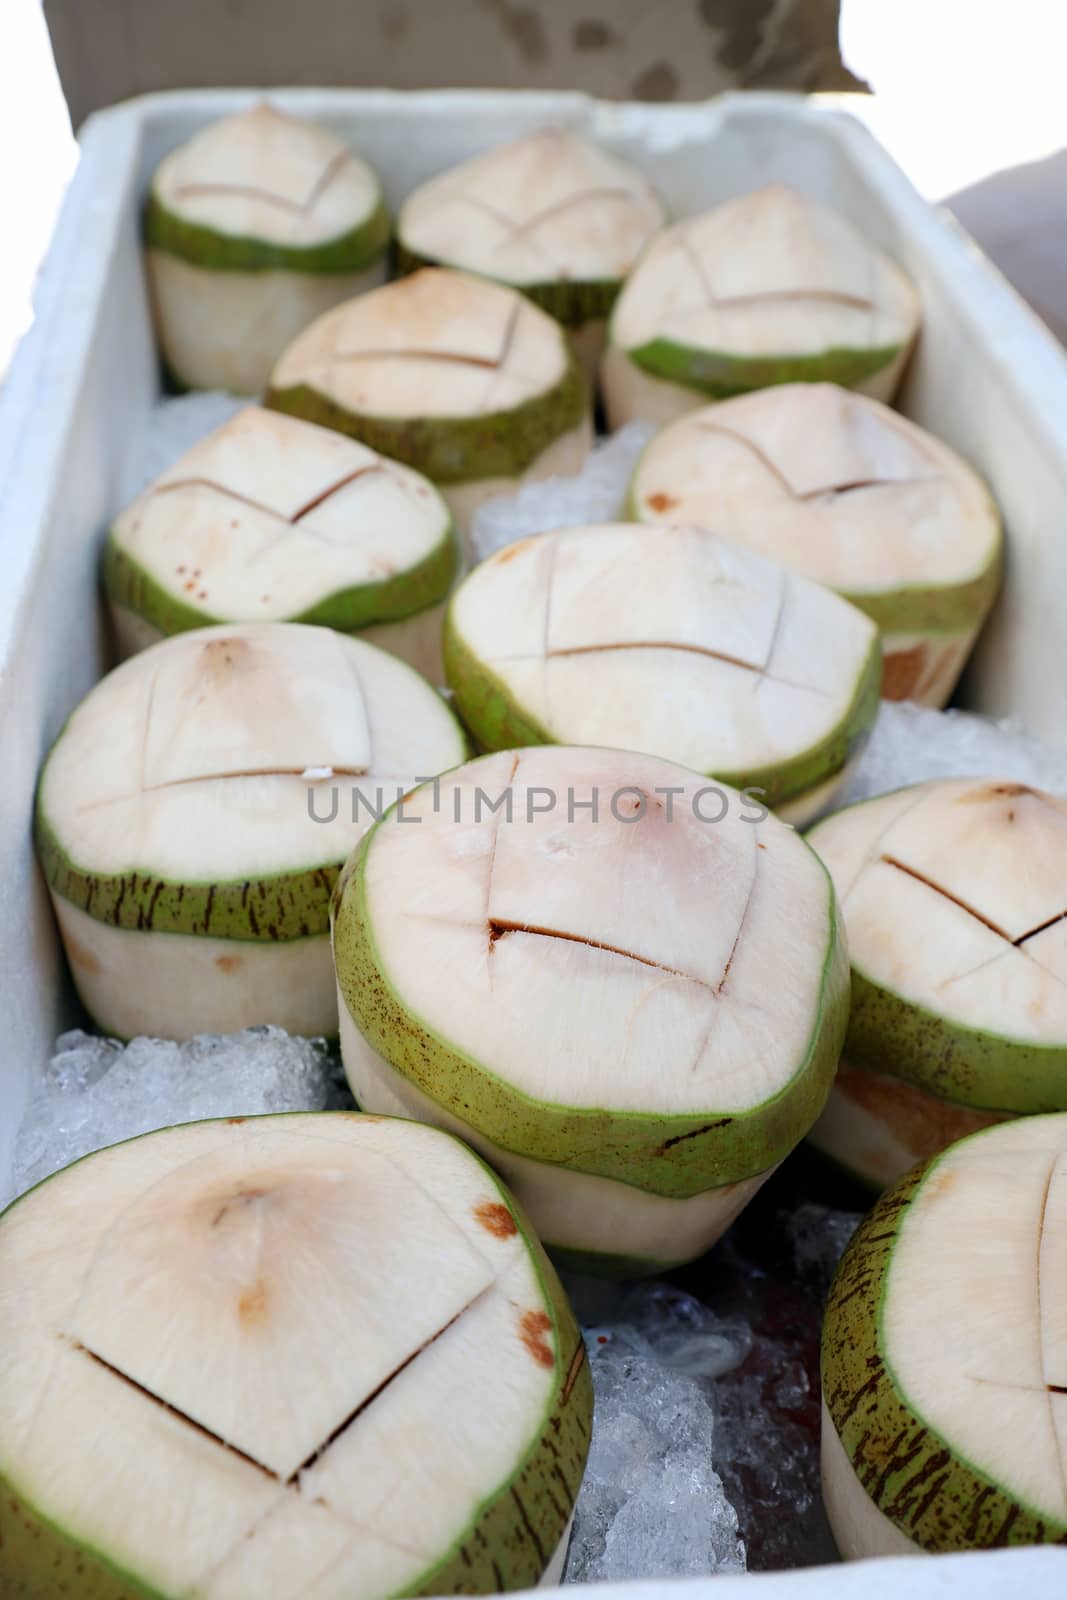 Cold fresh coconut Soak ice in a foam crate Cut openings ready to serve. Selective focus.